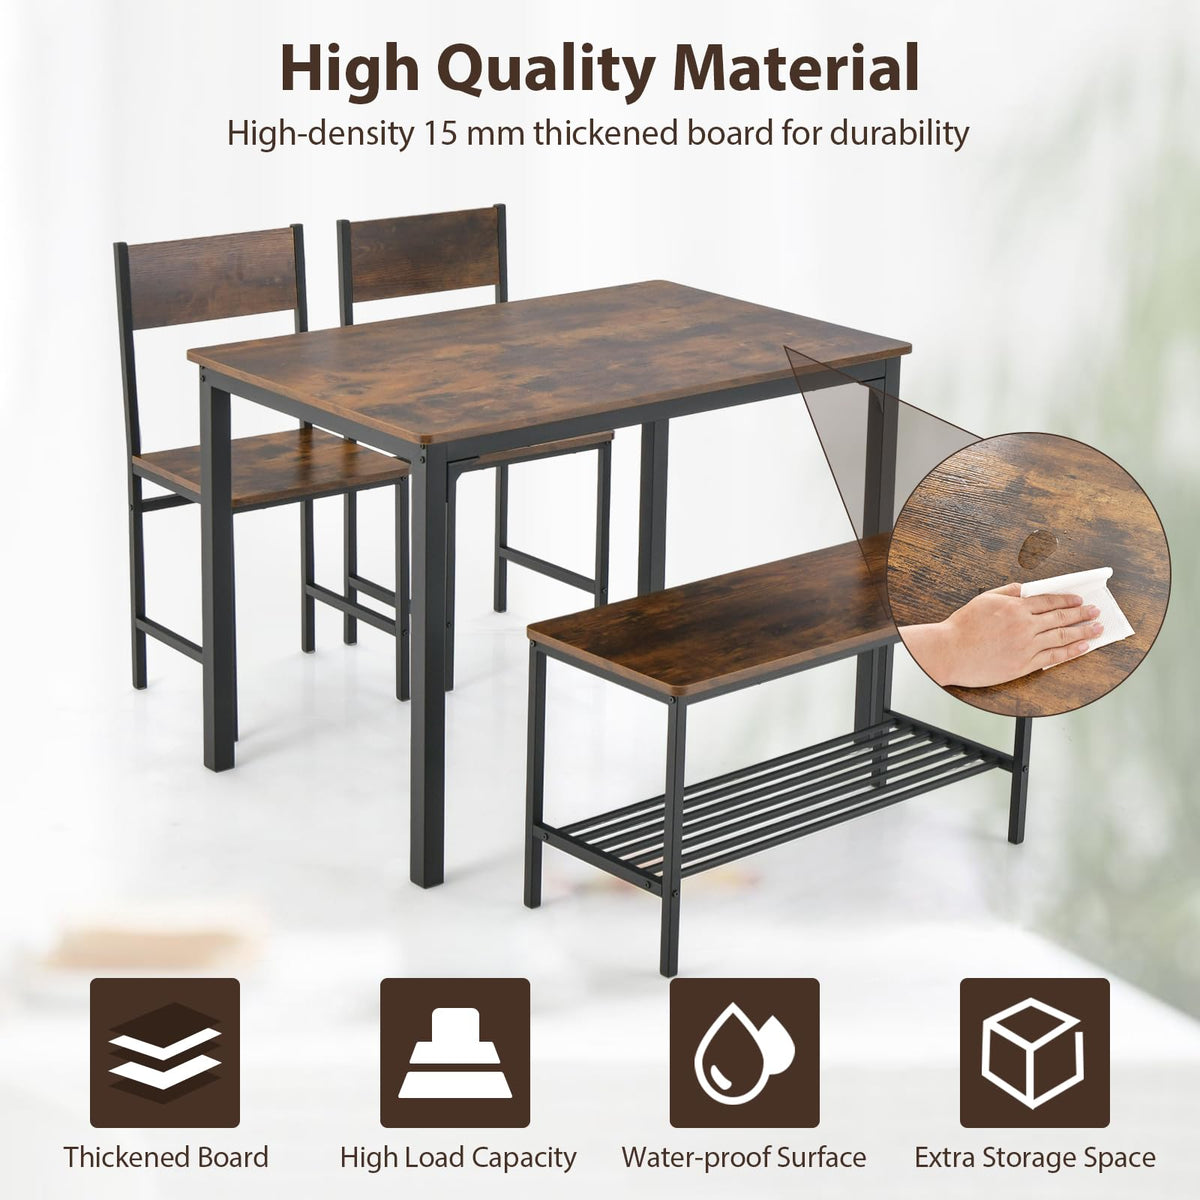 Giantex 4-Piece Dining Table & Chair Set